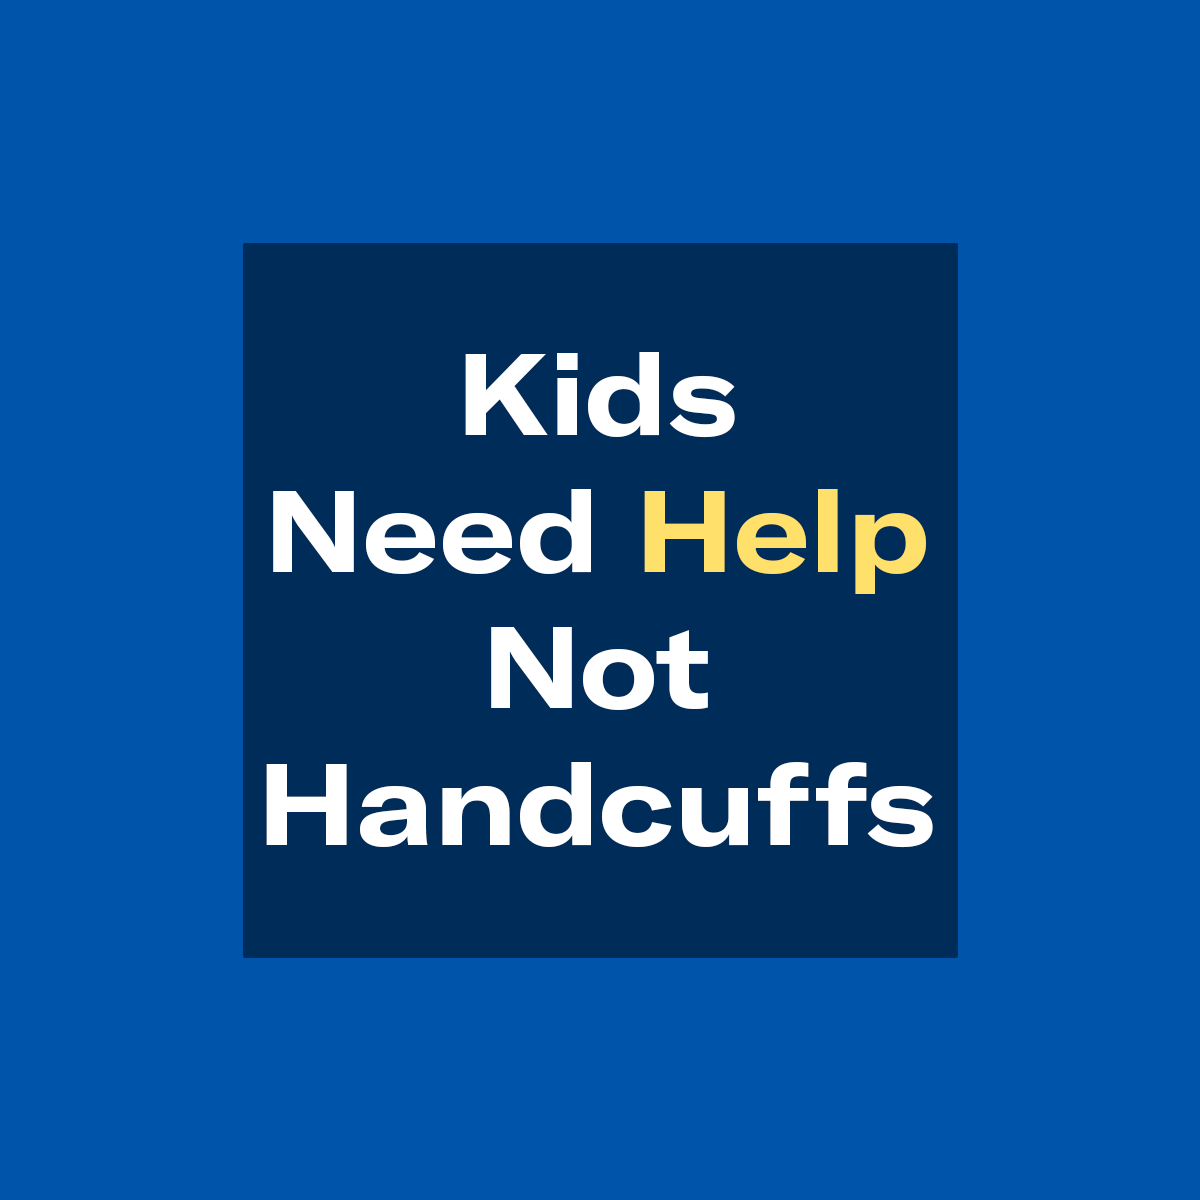 "Kids need help not handcuffs." Text appears in white over a blue background.